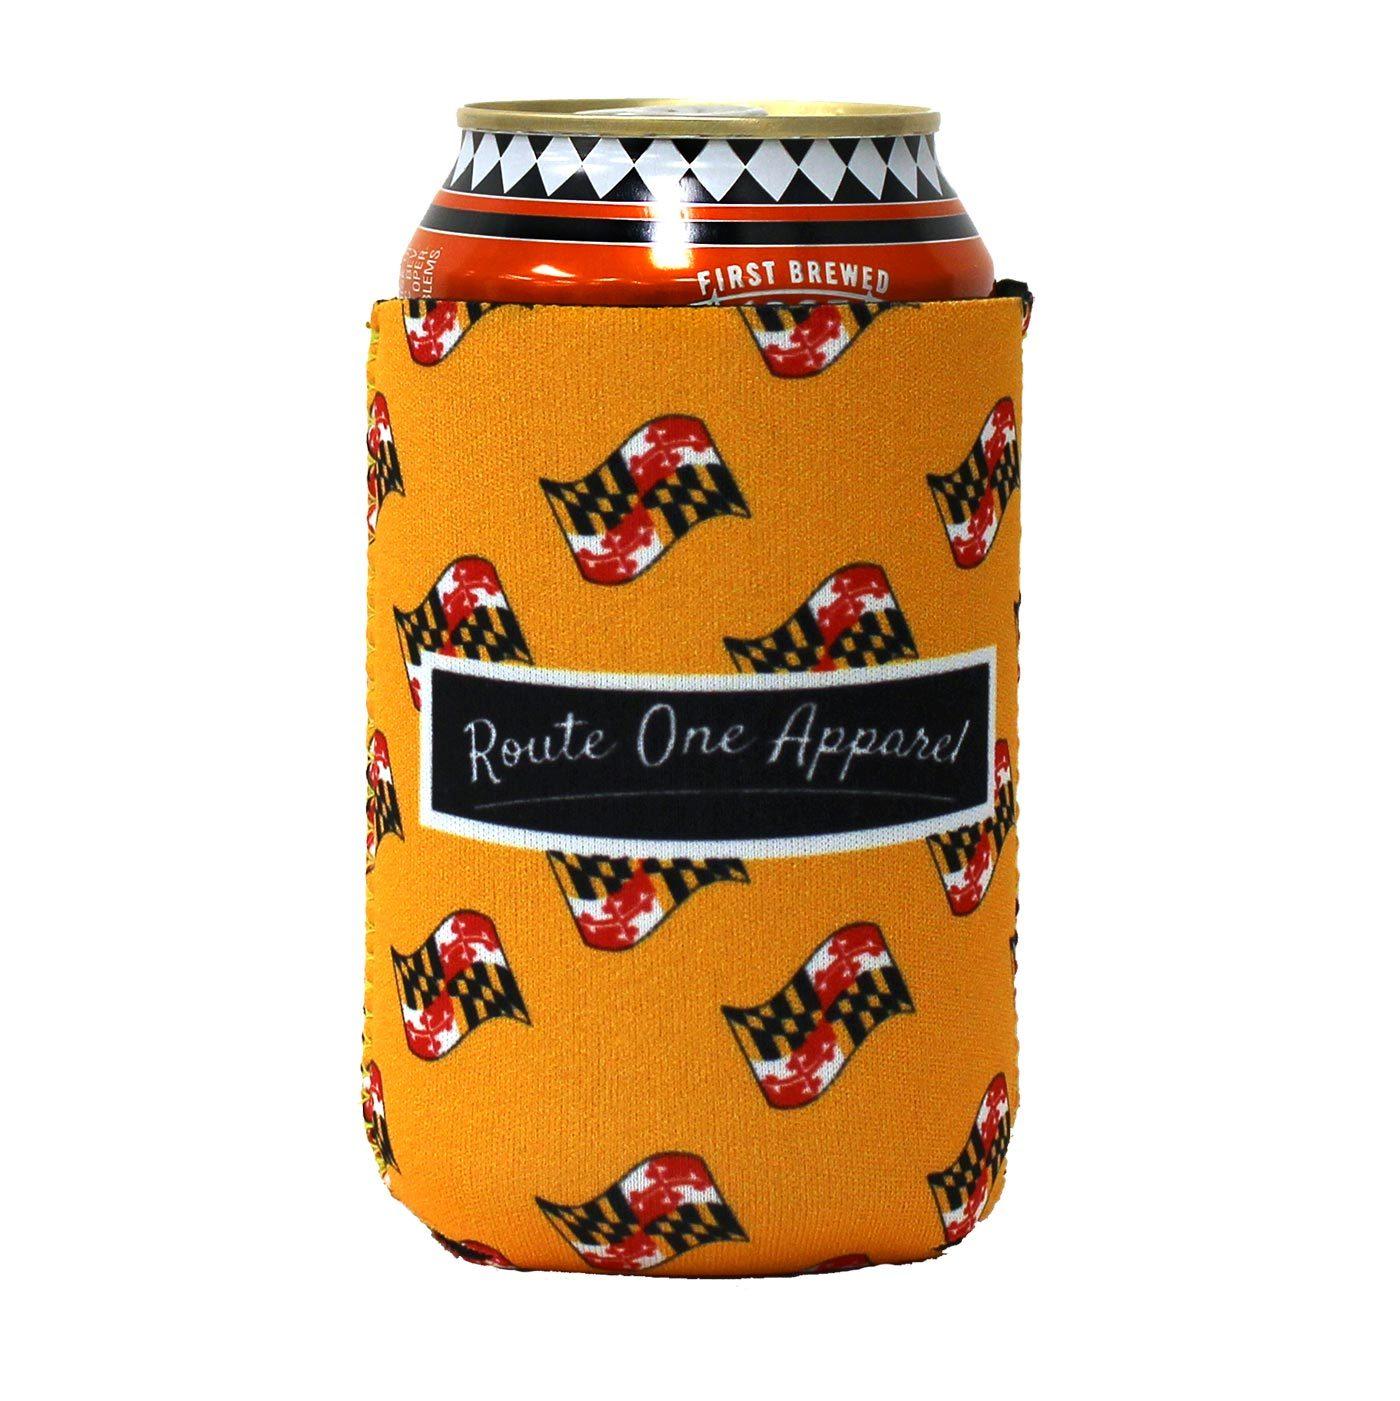 Waving Maryland Flag Pattern (Sky Blue, Grey, Yellow, & Burgundy) / Can Cooler *BUNDLE SET* - Route One Apparel